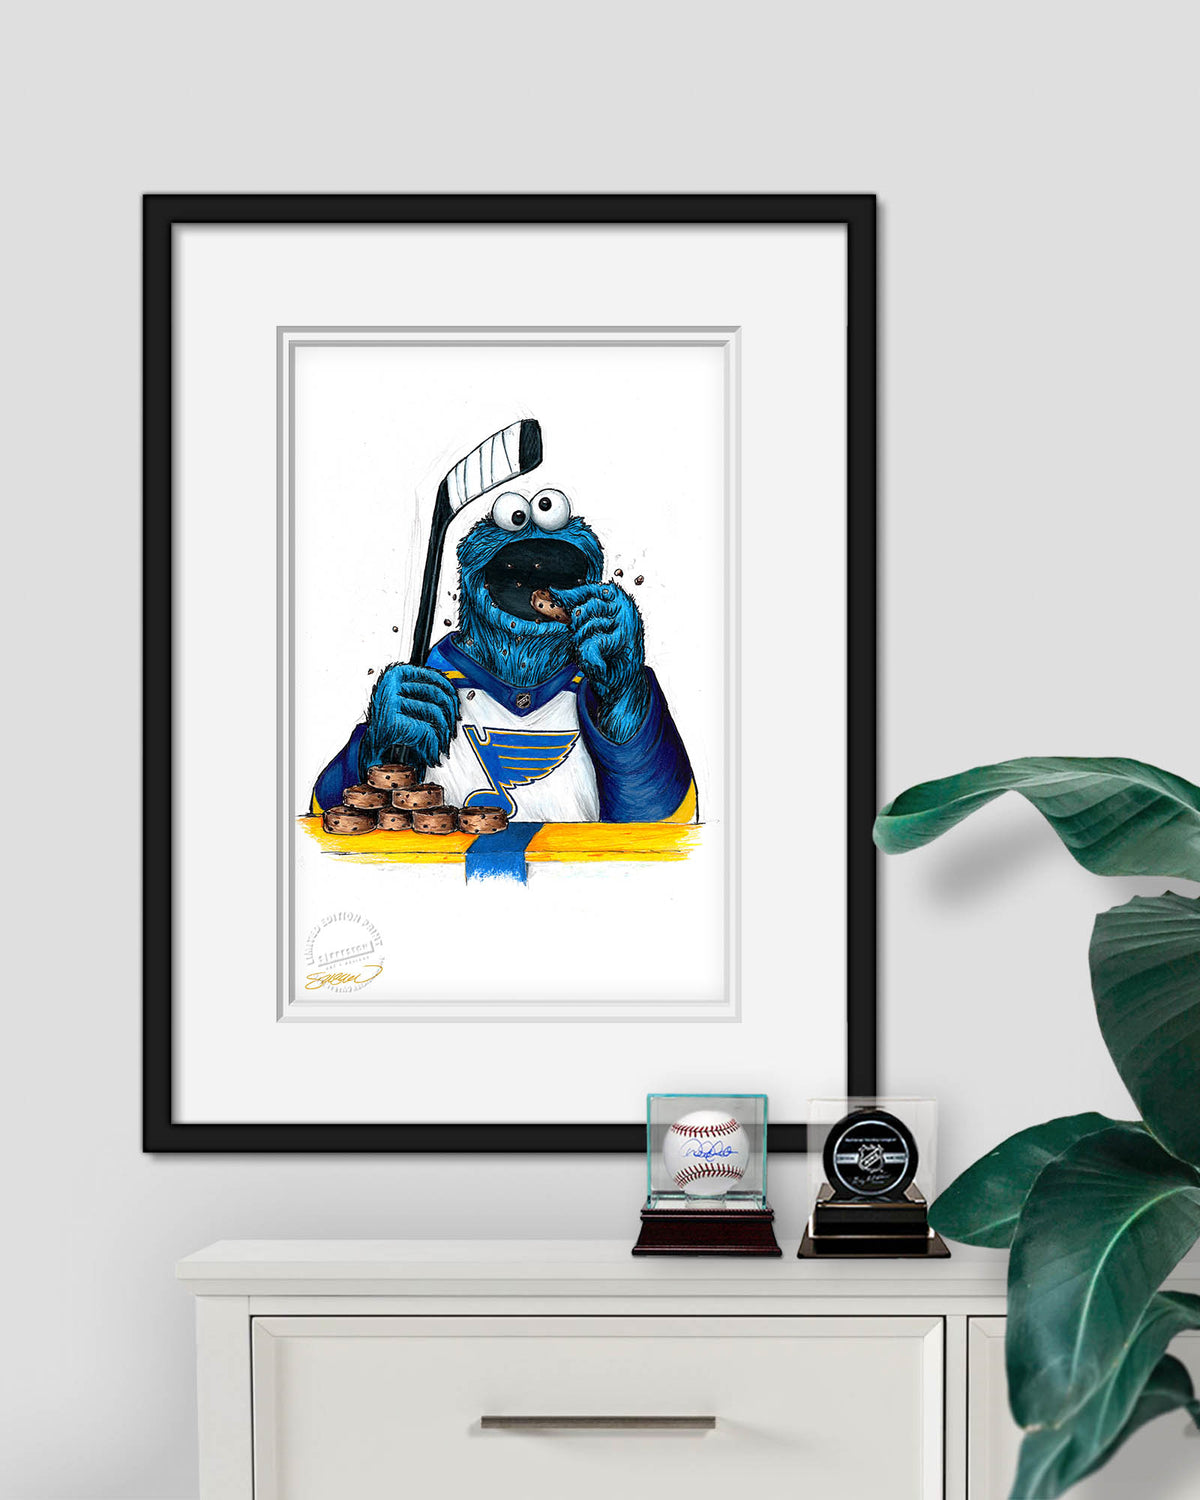 Cookie Monster x NHL Blues Limited Edition Fine Art Print